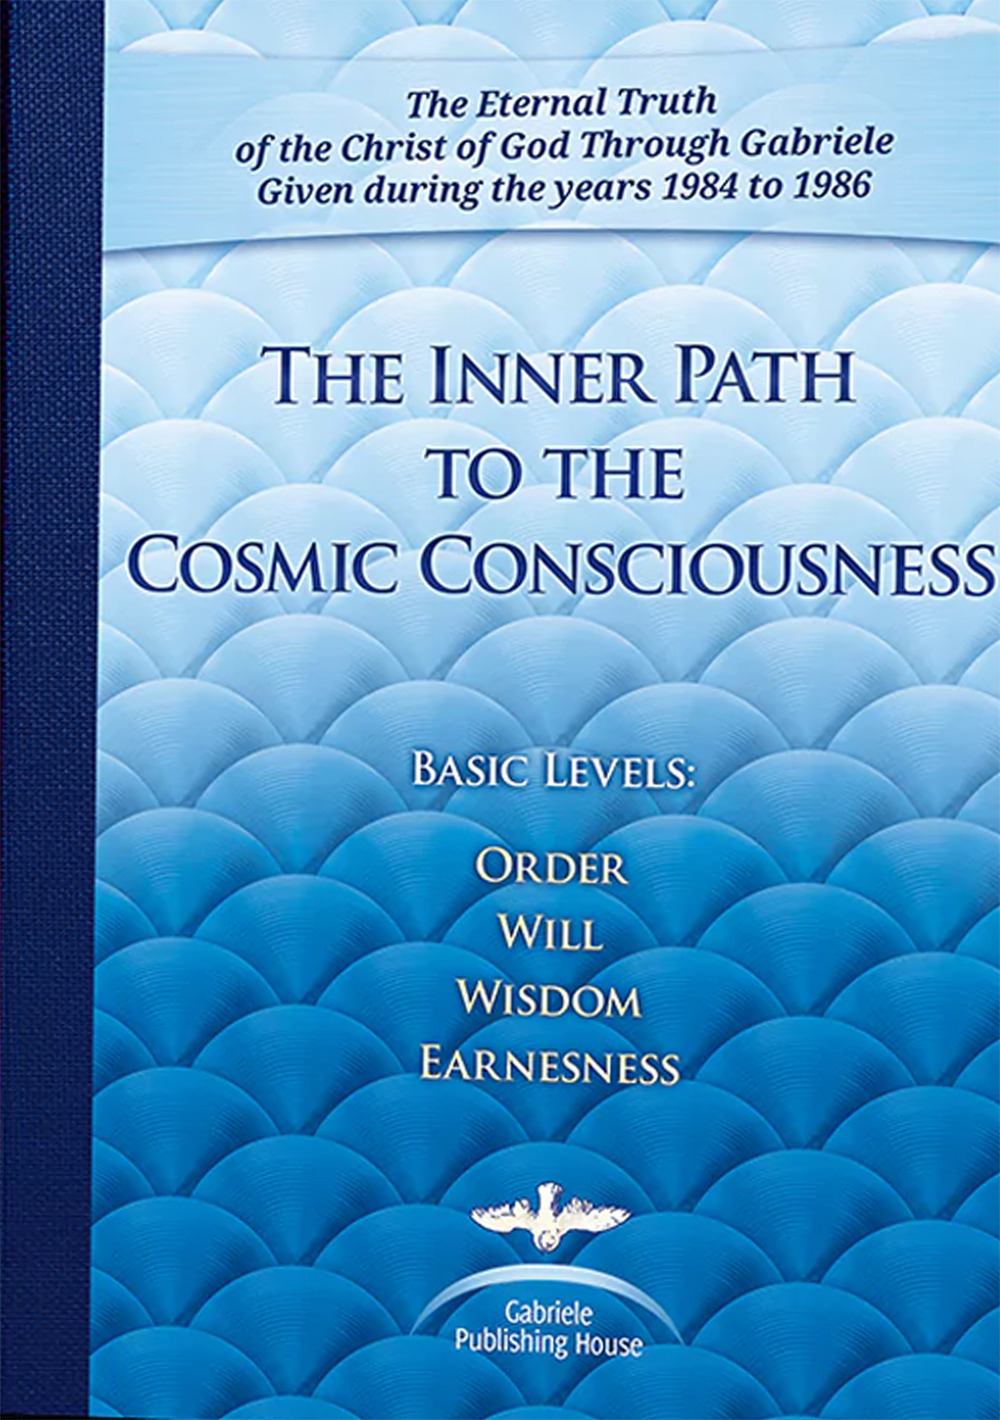 The inner path to the cosmic consciousness (Basic Levels Order-Will-Wisdom-Earnestness)